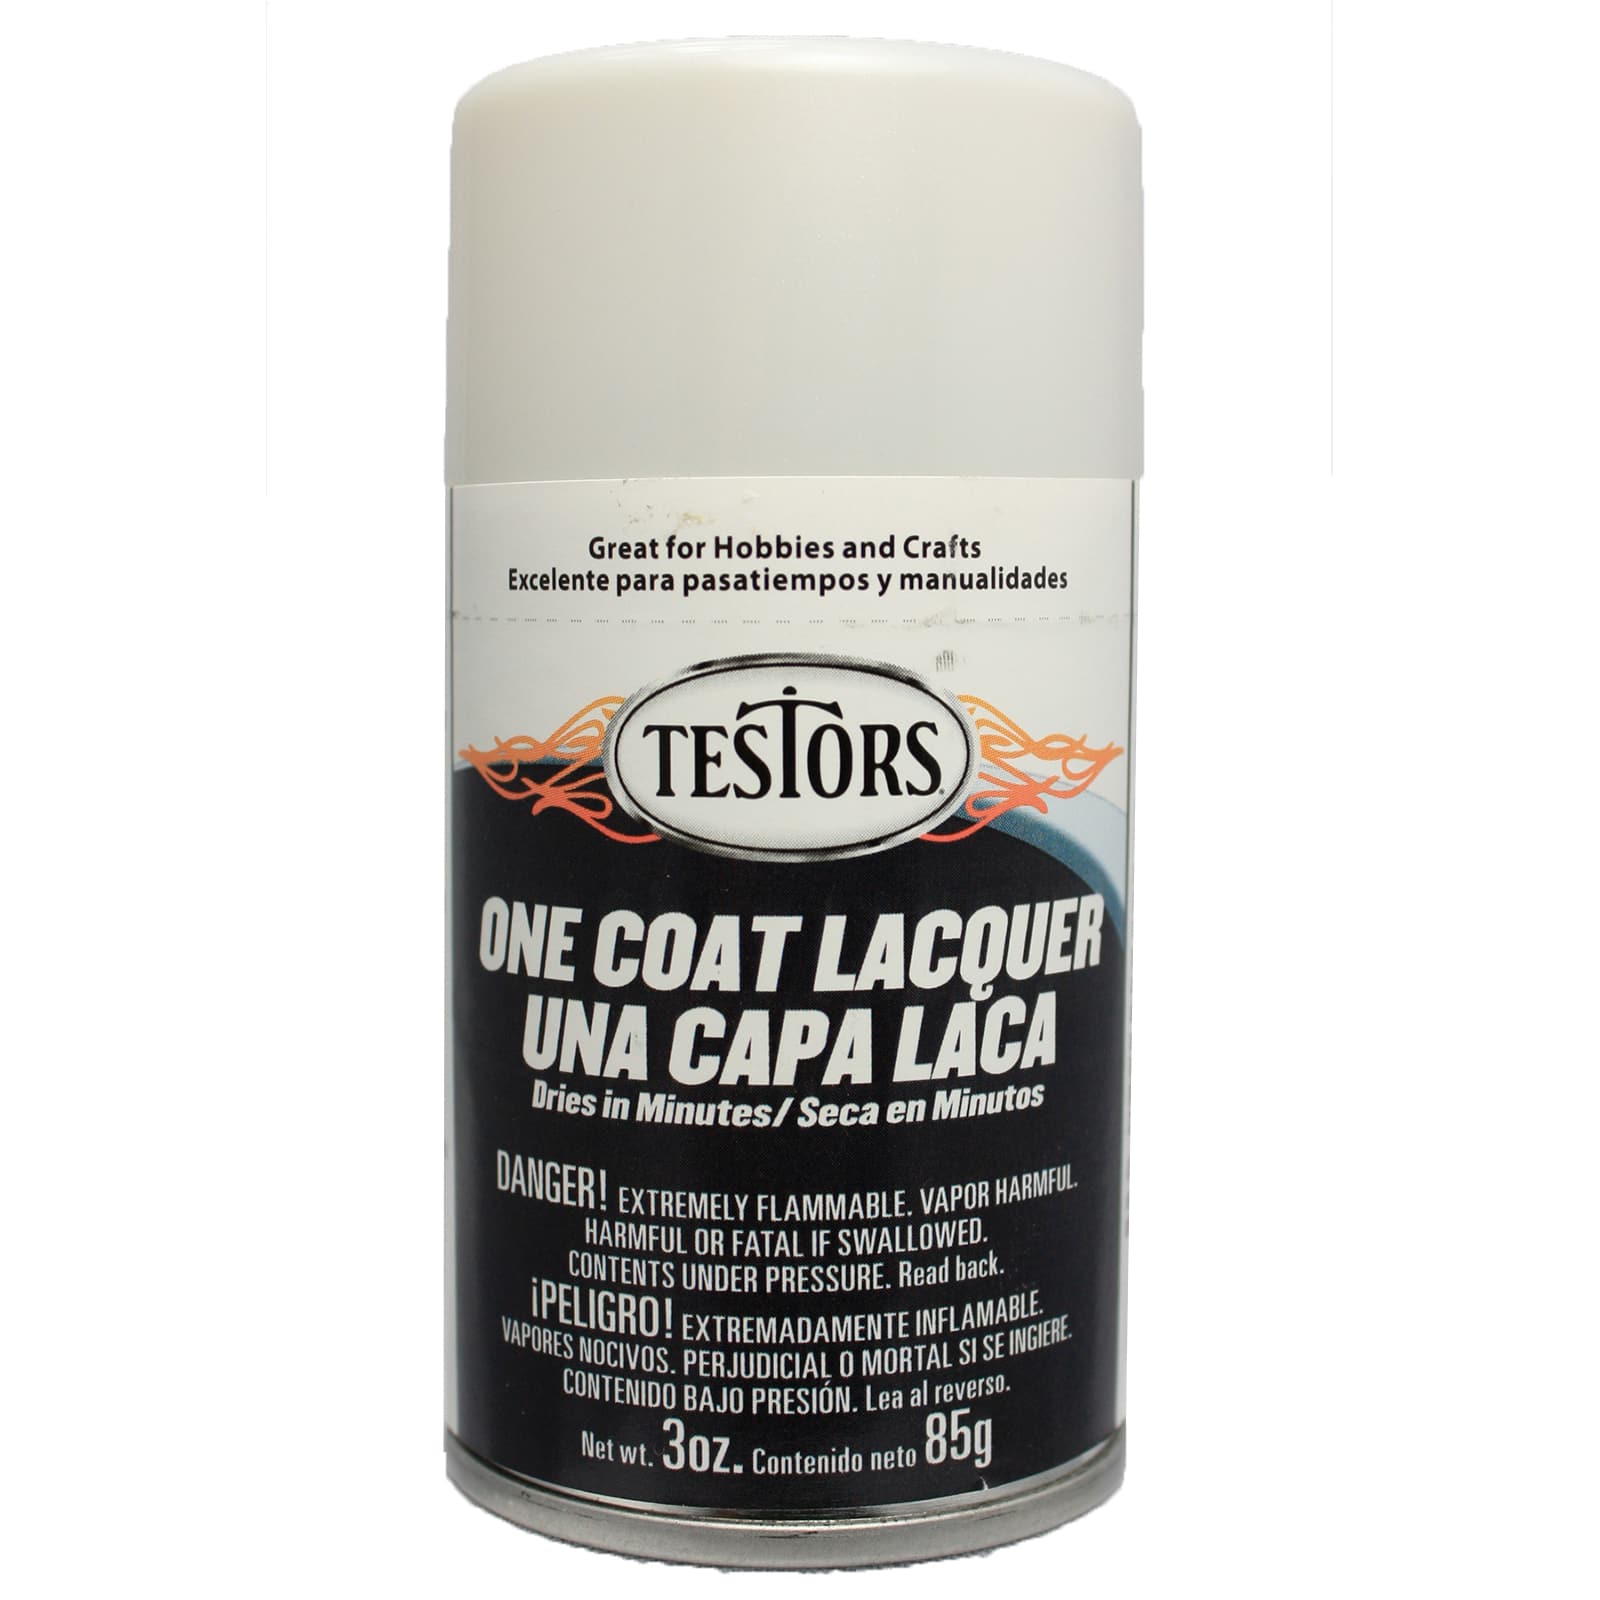 Tactics - At long last! The finest varnish avaliable in all the land. After  years seeking supplies, we have a restock of Testors Dullcote!